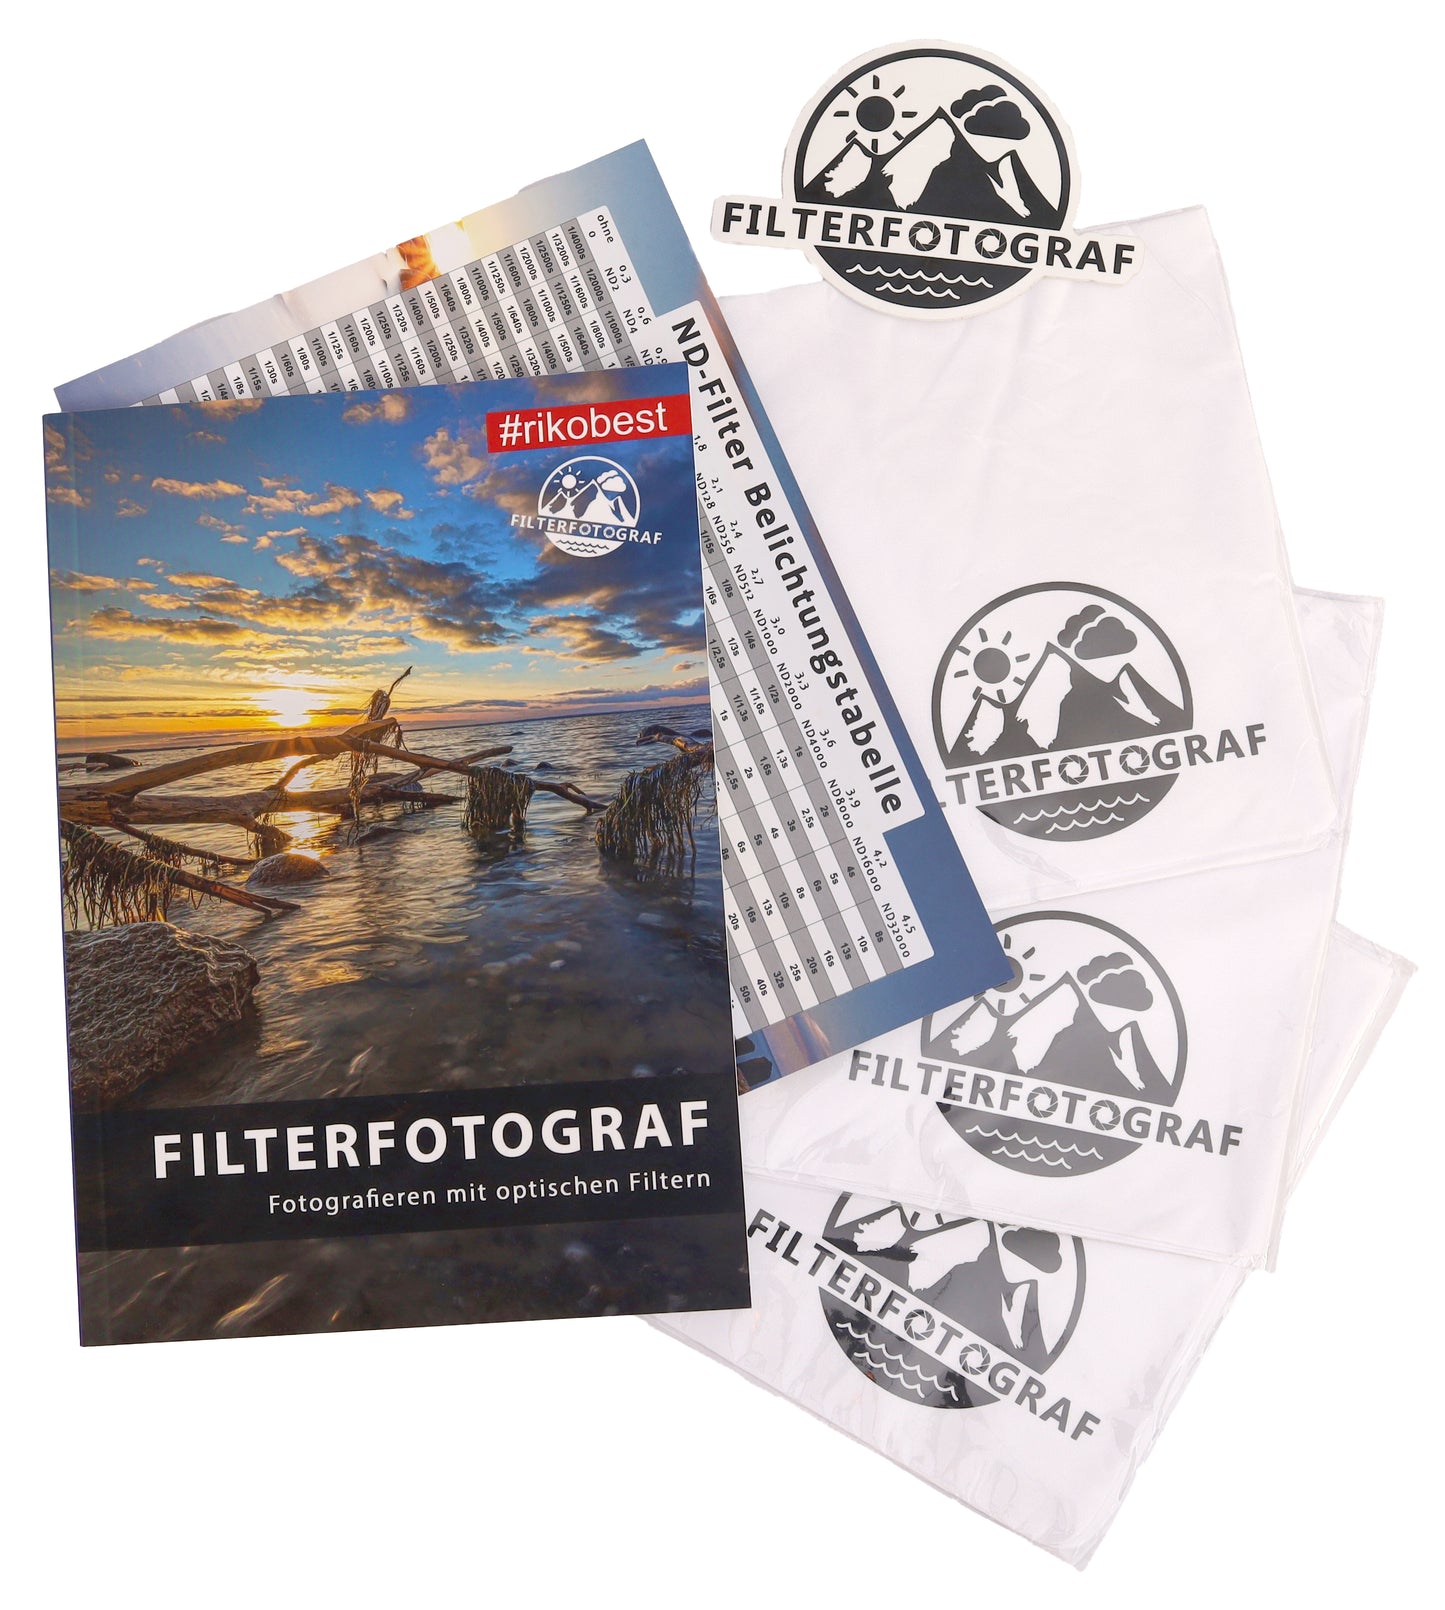 Filter photographer – take photos with optical filters - Bundle Edition